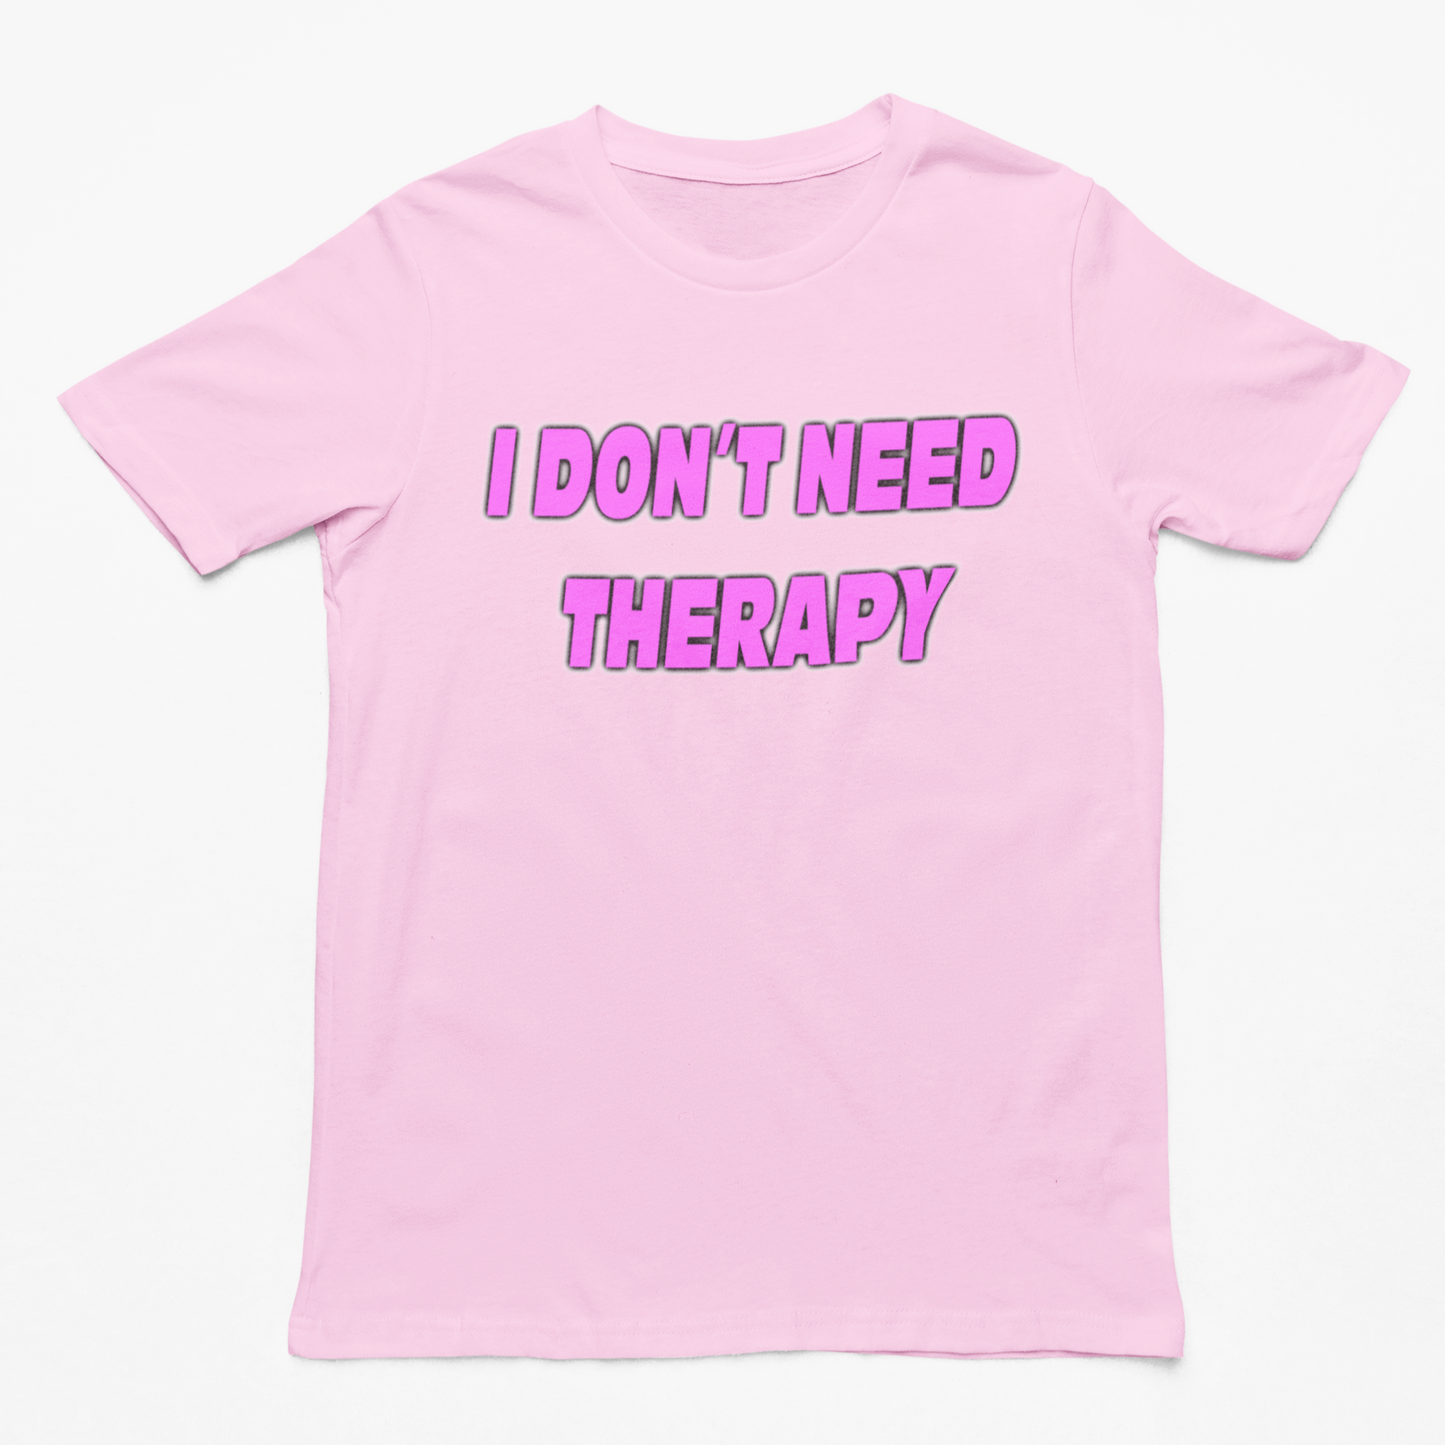 I Don't Need Therapy t-shirt